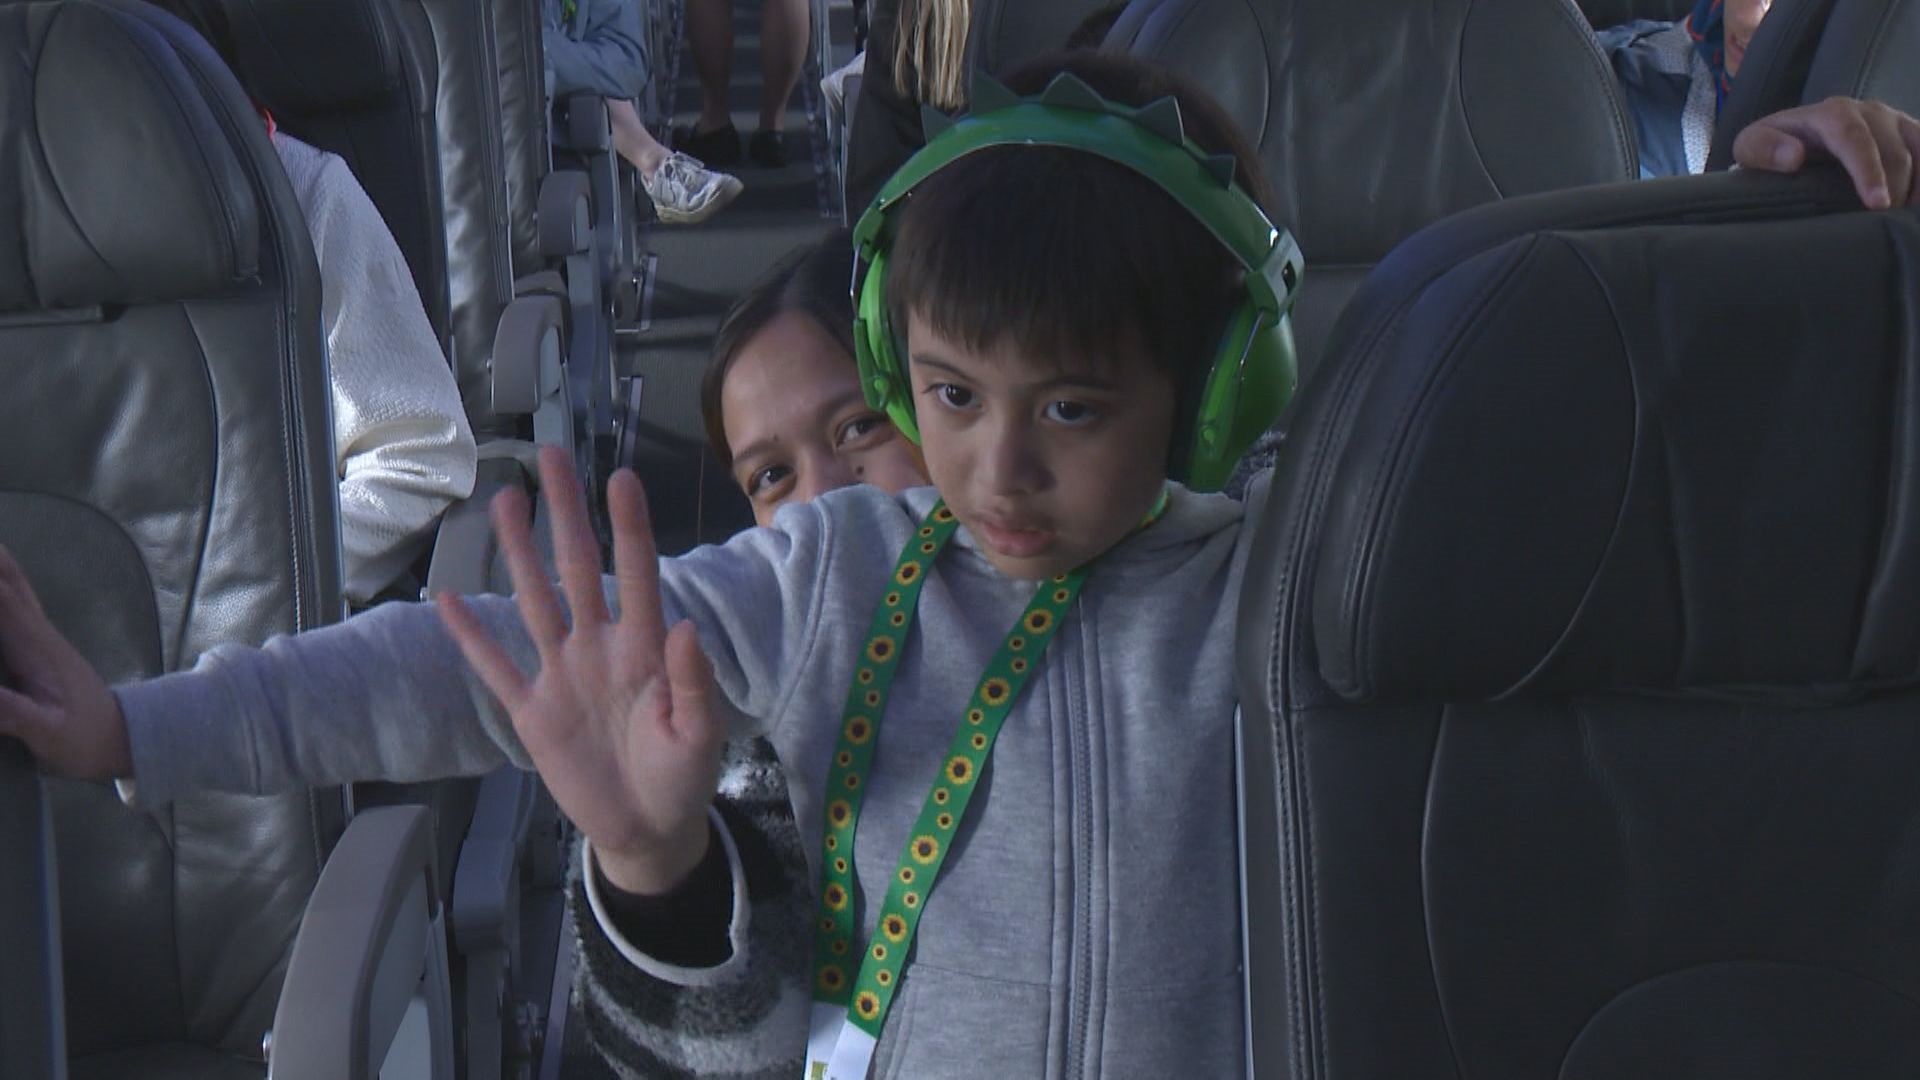 Austim awareness: Vancouver International Airport, Canucks network
host ‘Learn to Fly’